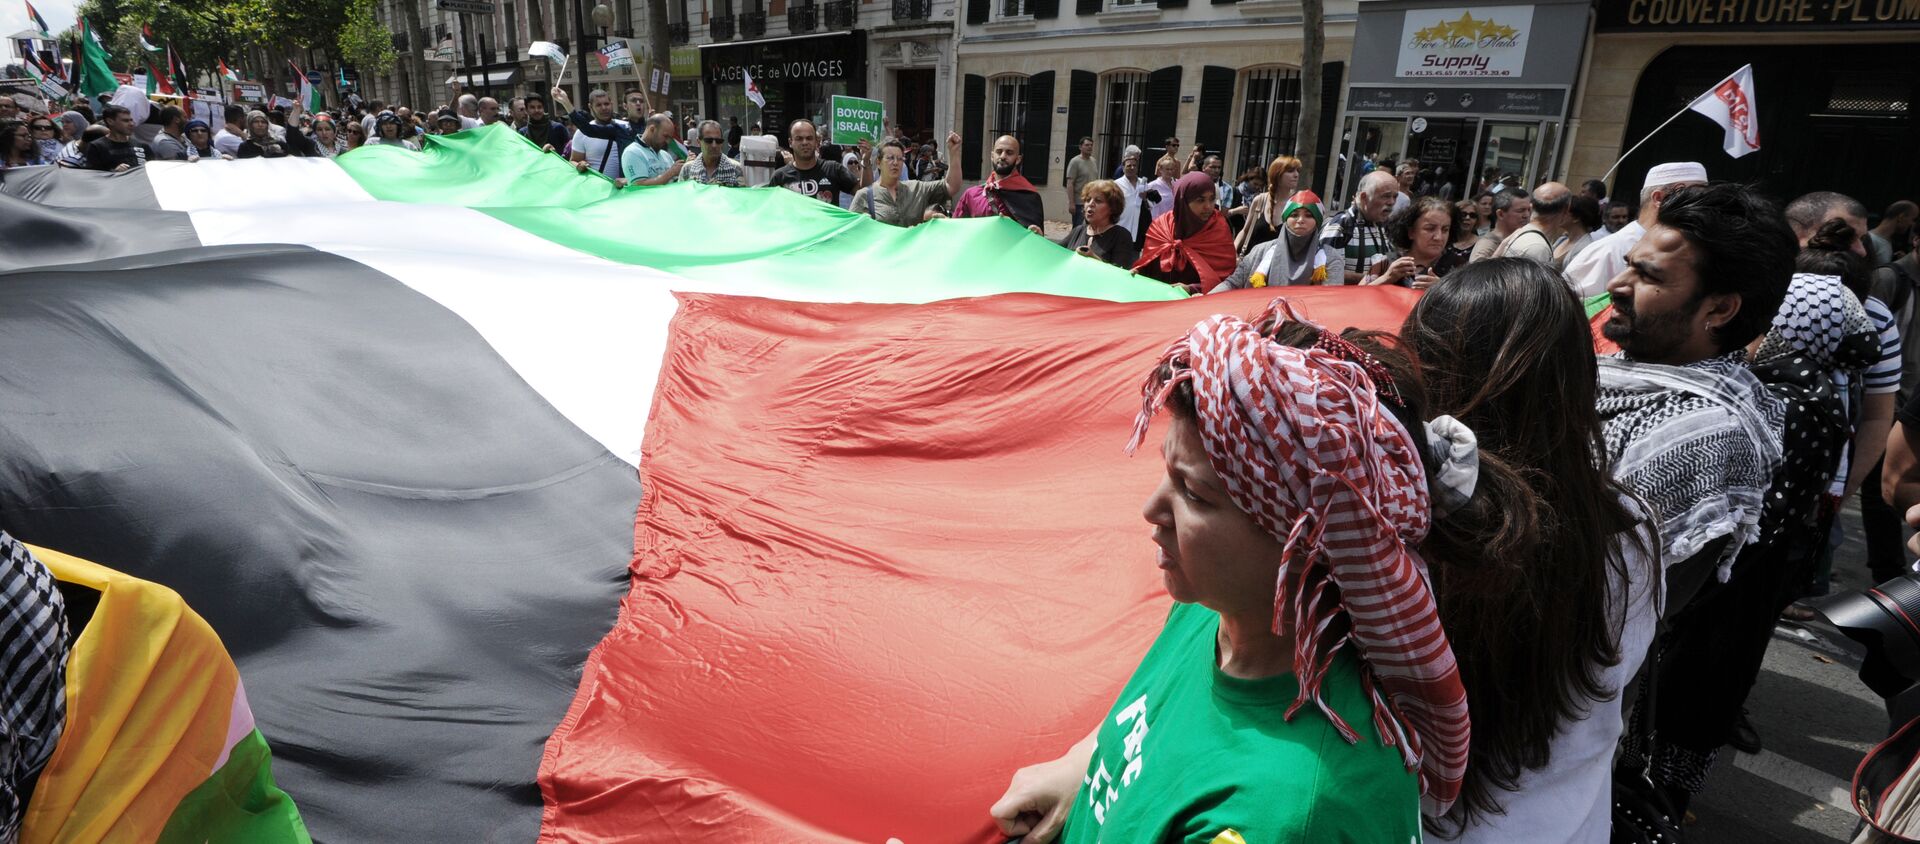 Protesters unfold a large Palestinian flag during a pro-Palestinian demonstration in Paris on August 2, 2014 - Sputnik International, 1920